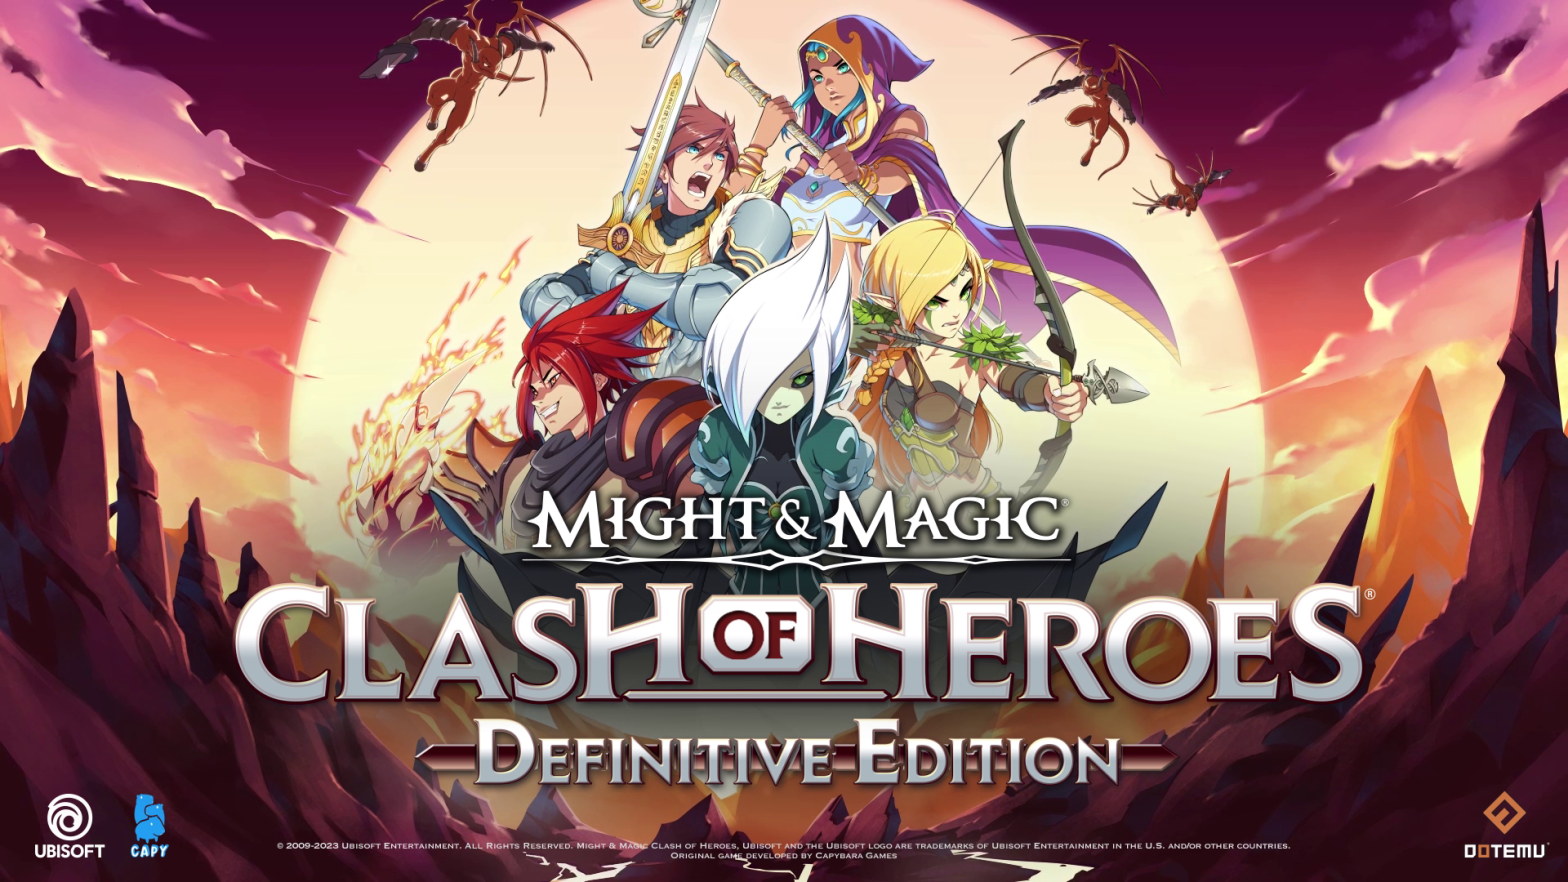 Might & Magic: Clash of Heroes – Definitive Edition now available on PC and consoles!